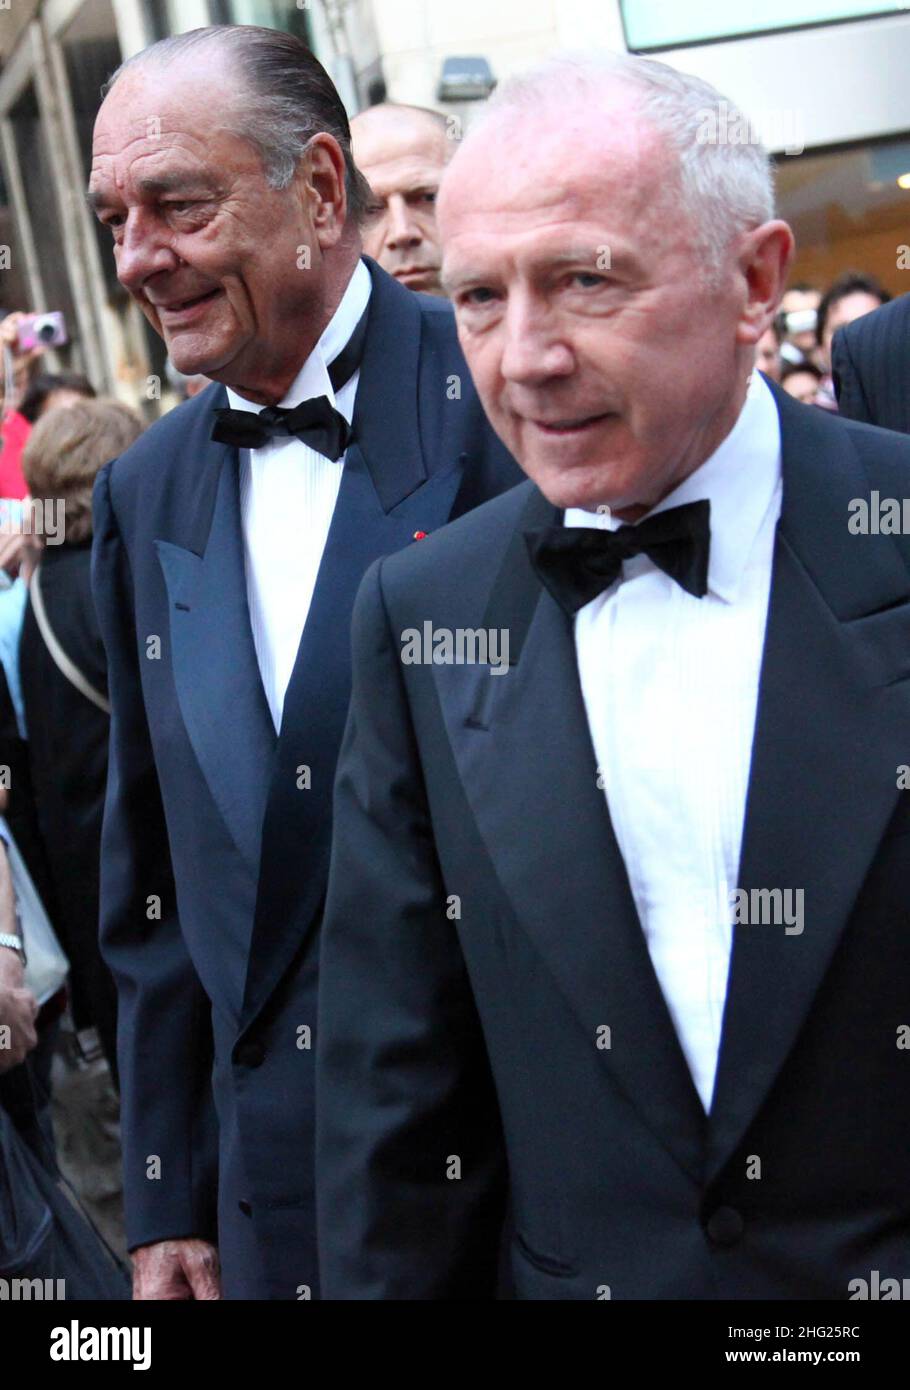 French businessman Francois Pinault, father of Francois-Henri Pinault, and French Former president Jacques Chirac arrive for the wedding ceremony of actress Salma Hayek and businessman Francois-Henri Pinault at the 'La Fenice' Theatre, in Venice, Italy on Saturday, April 25, 2009. Stock Photo